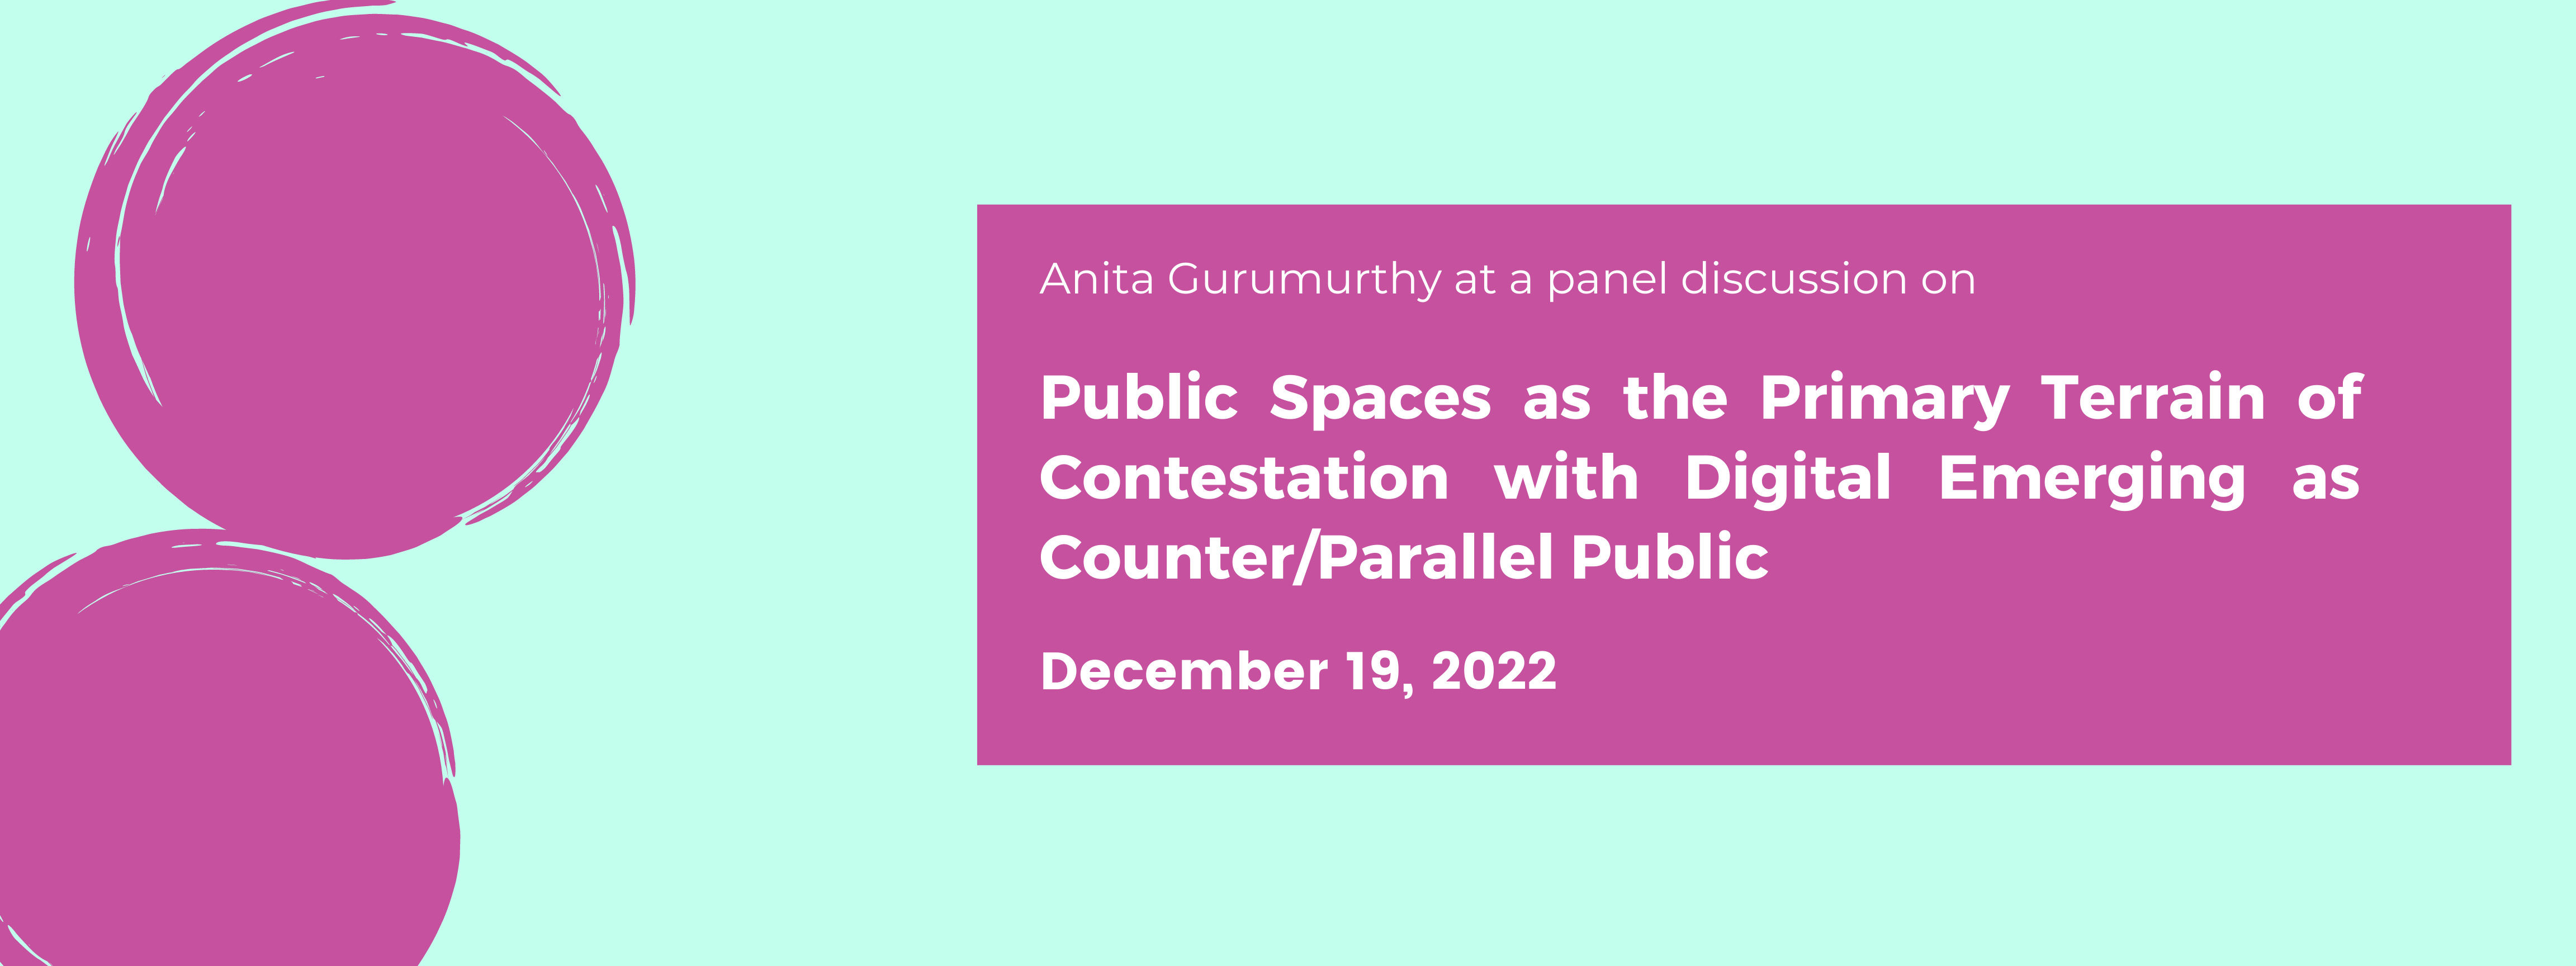 Public Spaces as the Primary Terrain of Contestation with Digital Emerging as Counter/Parallel Public